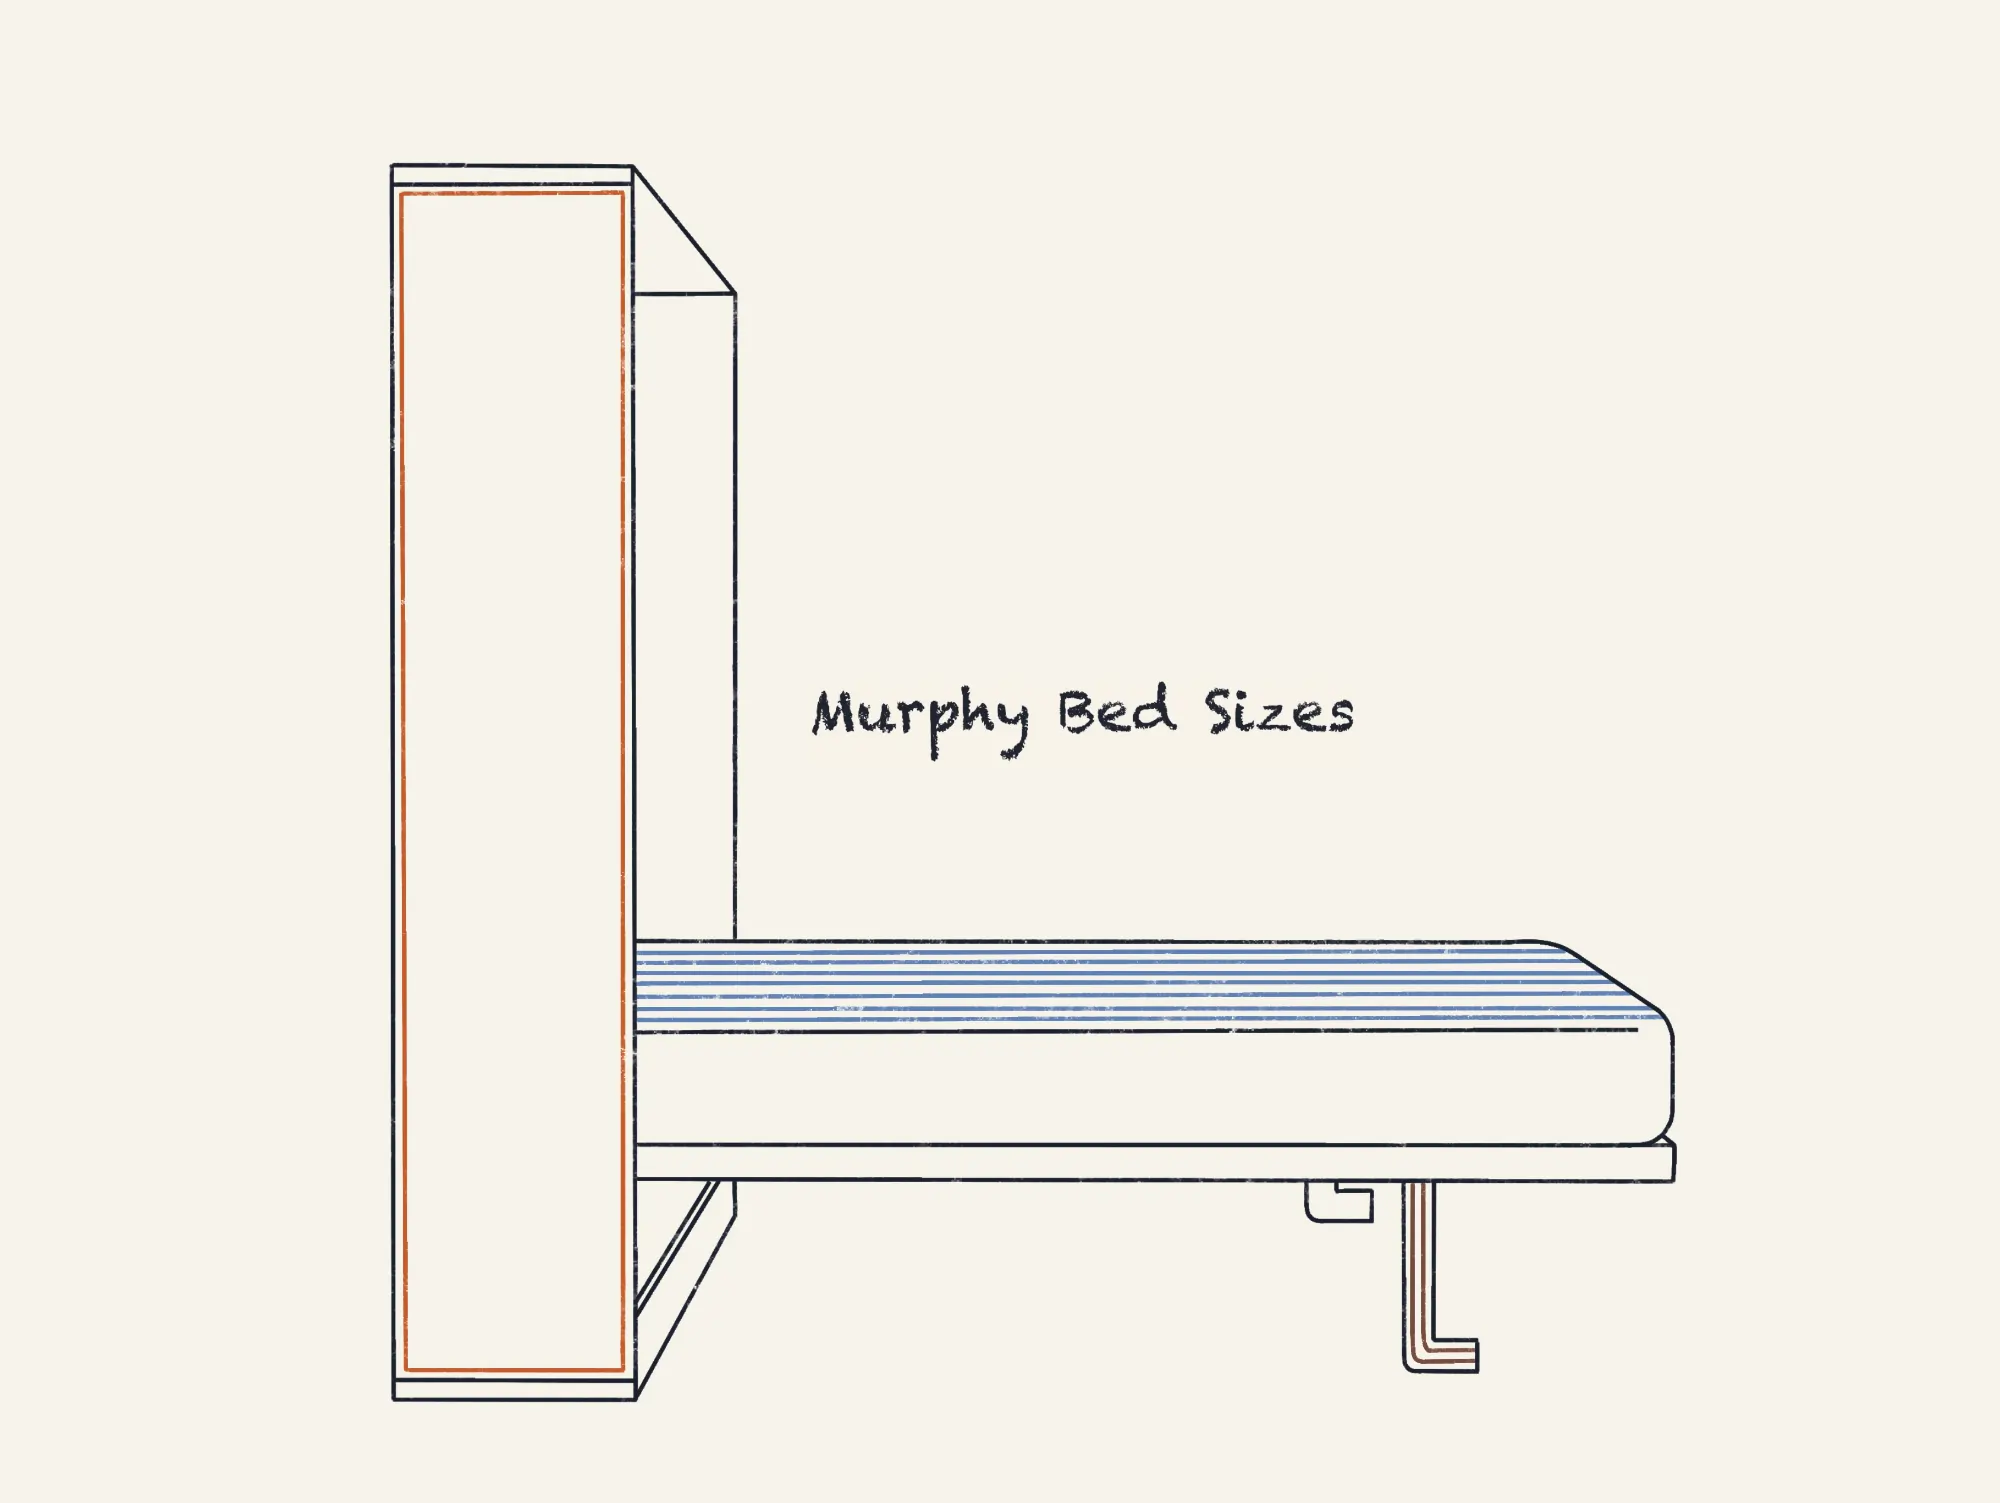 Illustration of Murphy Bed Sizes and Dimensions Guide